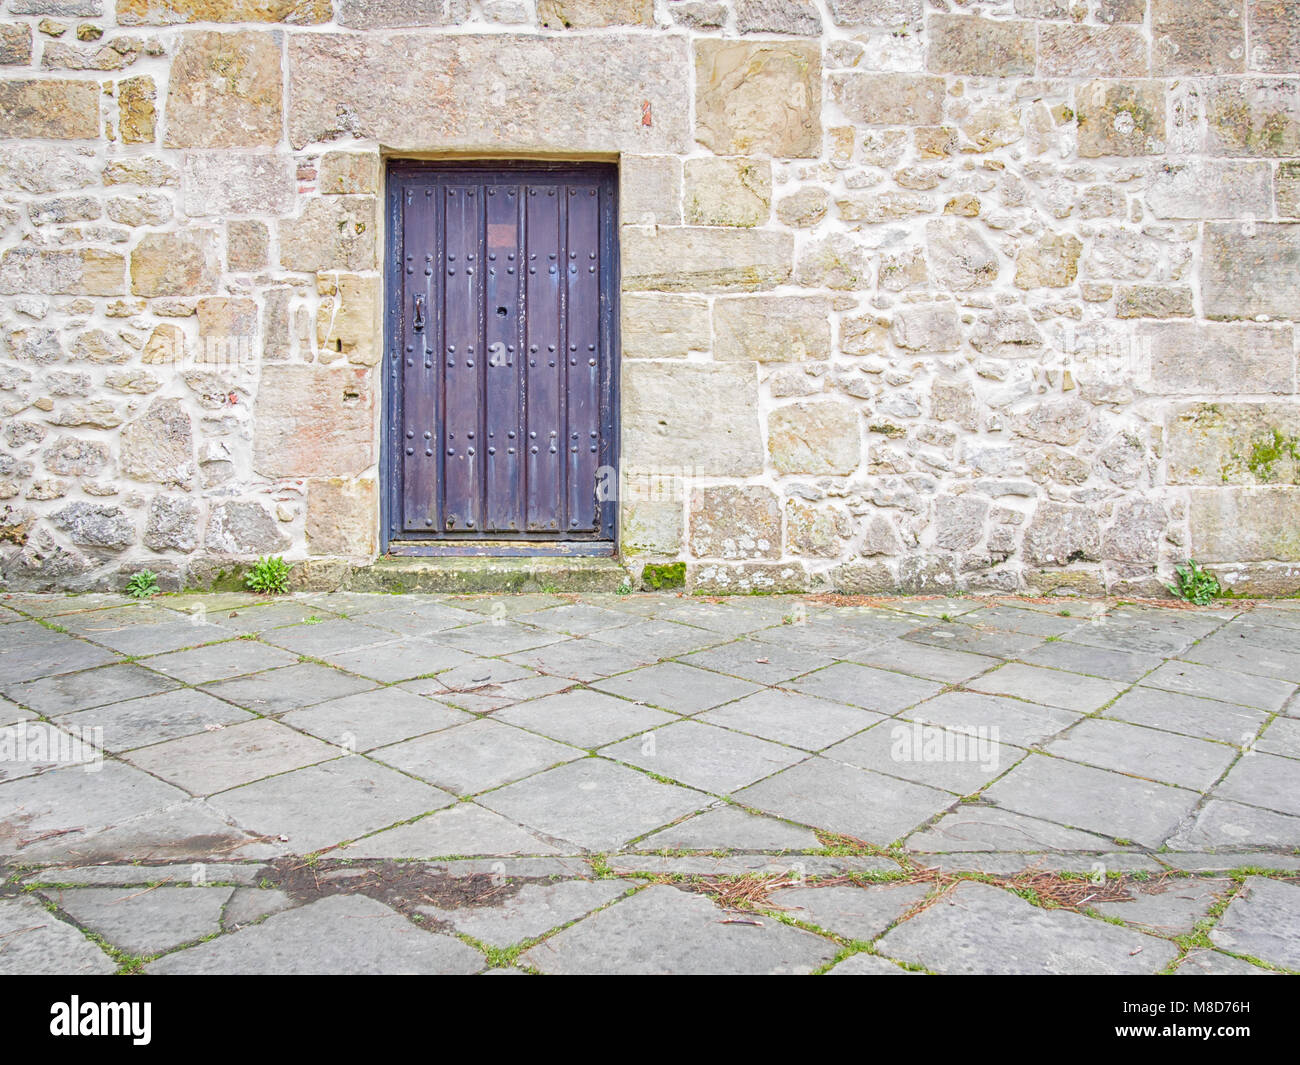 Door in the medieval stone wall Stock Photo